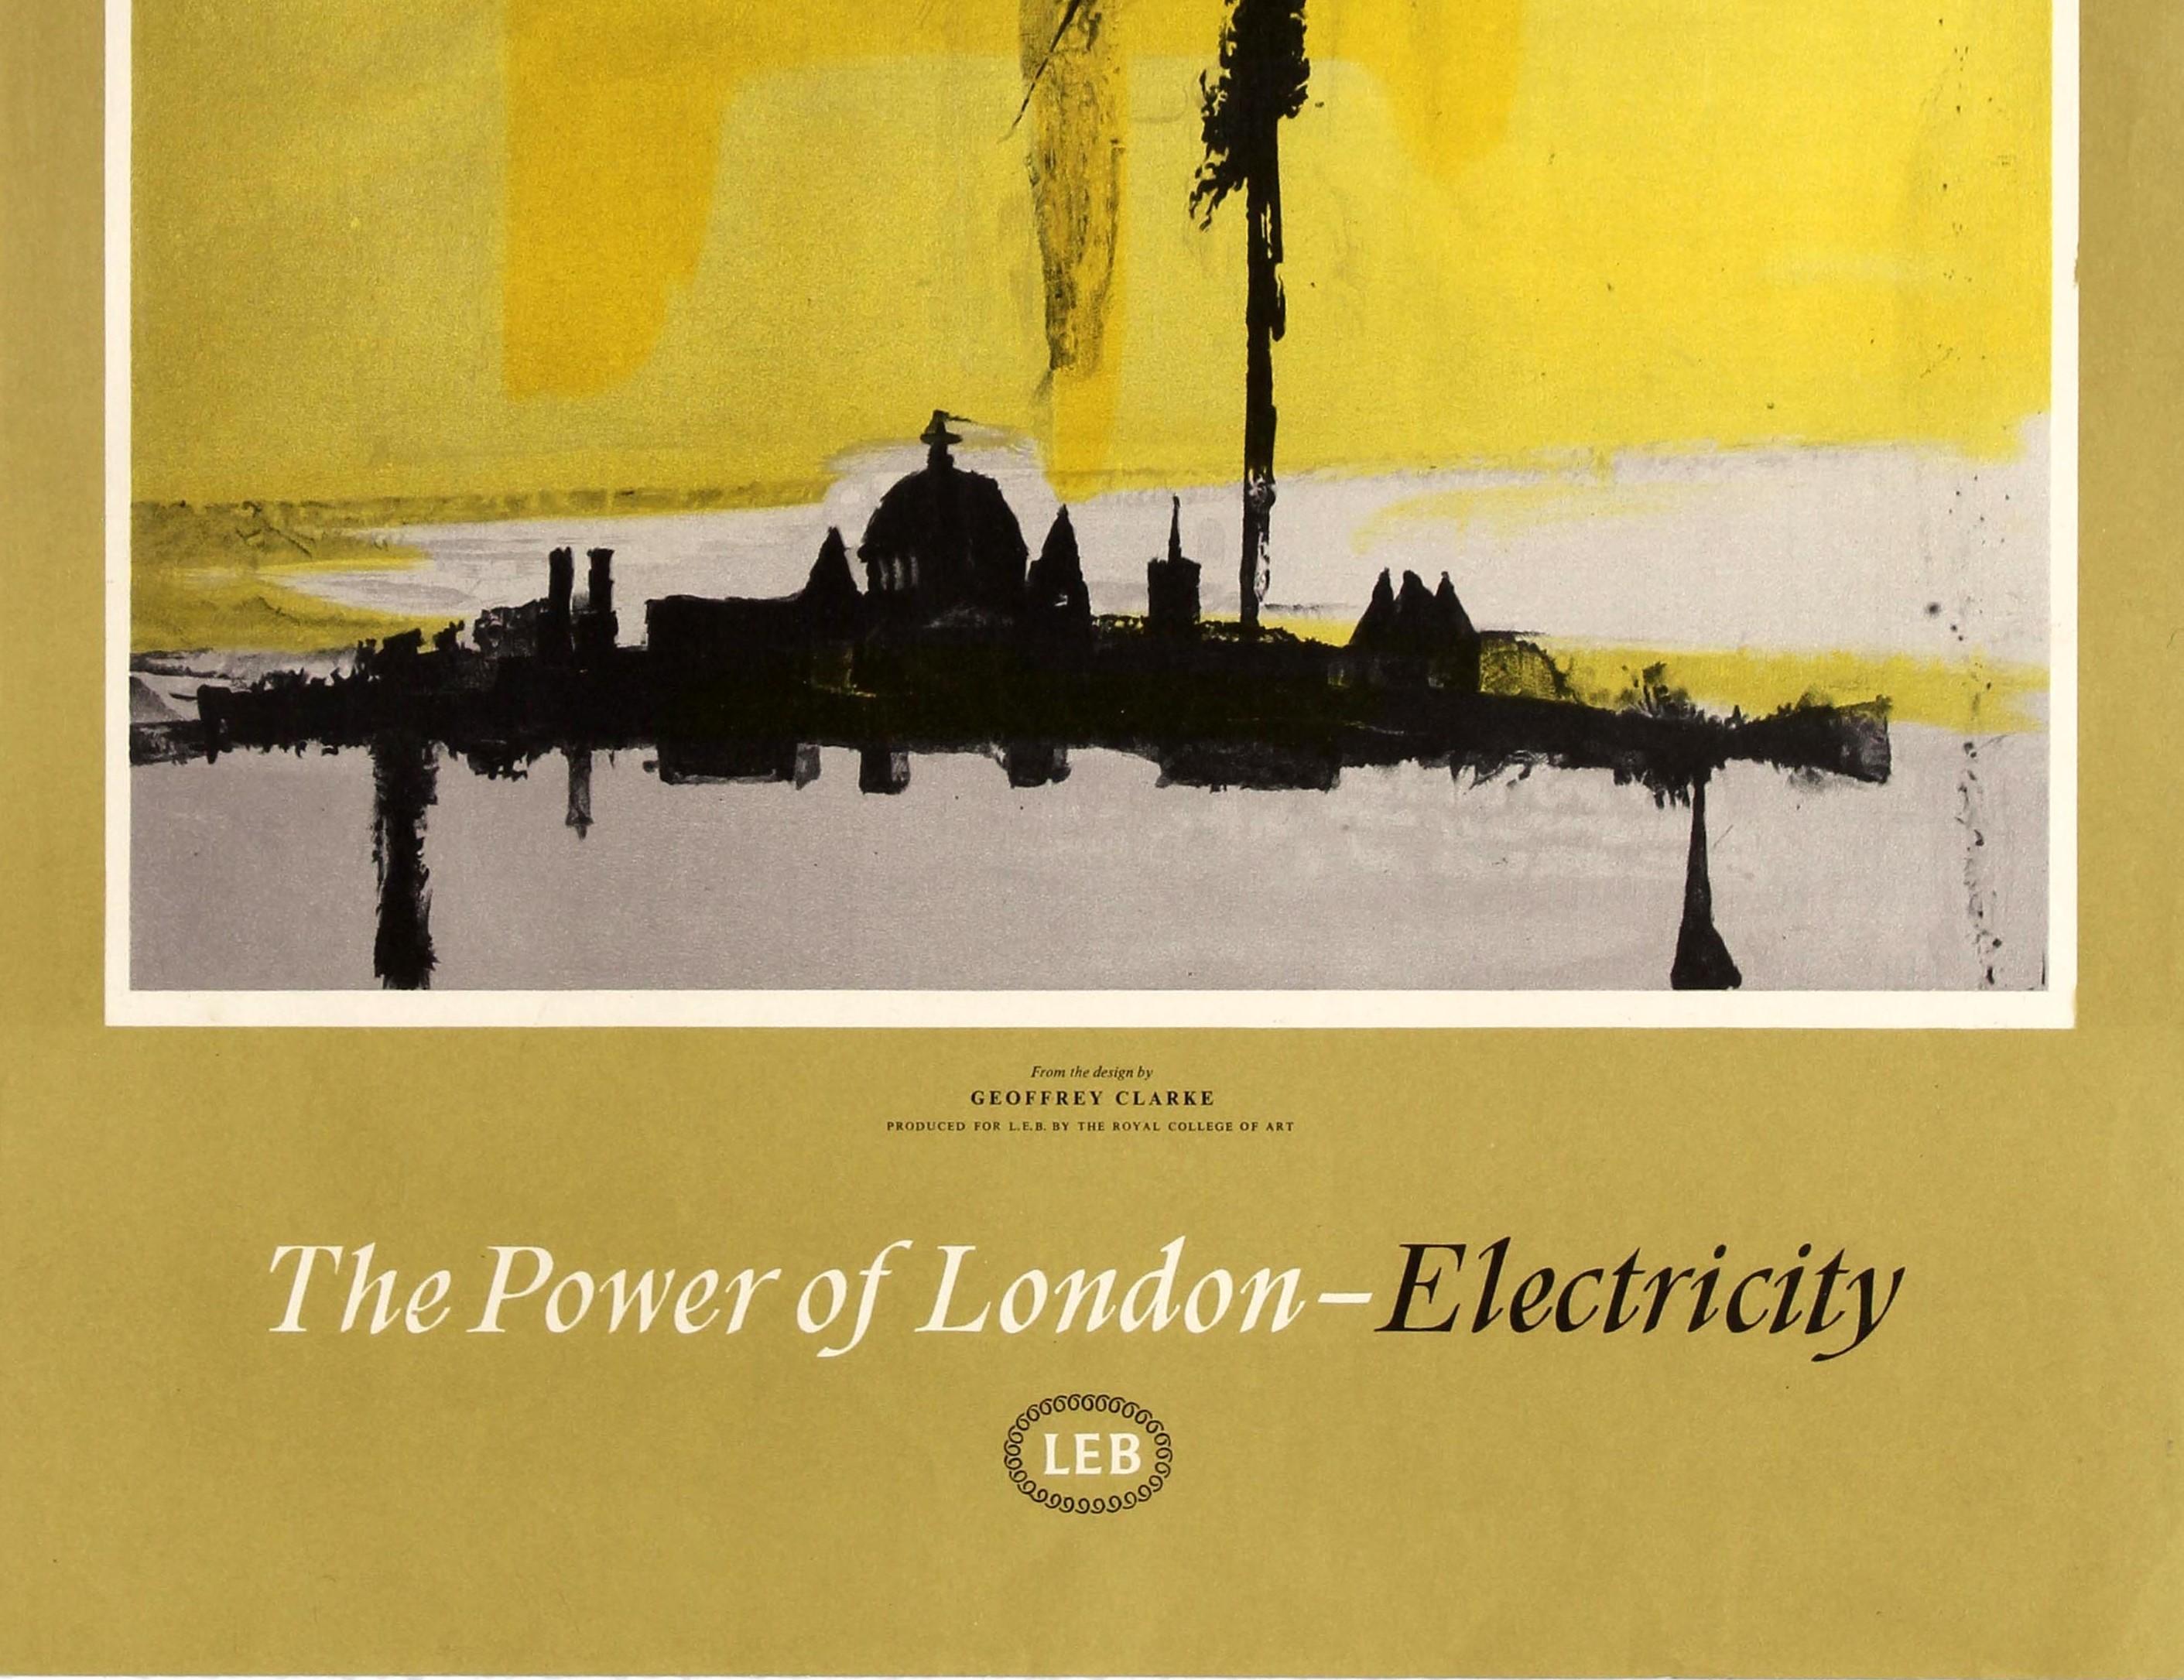 Mid-20th Century Original Vintage London Electricity Board Poster The Power Of London Skyline LEB For Sale